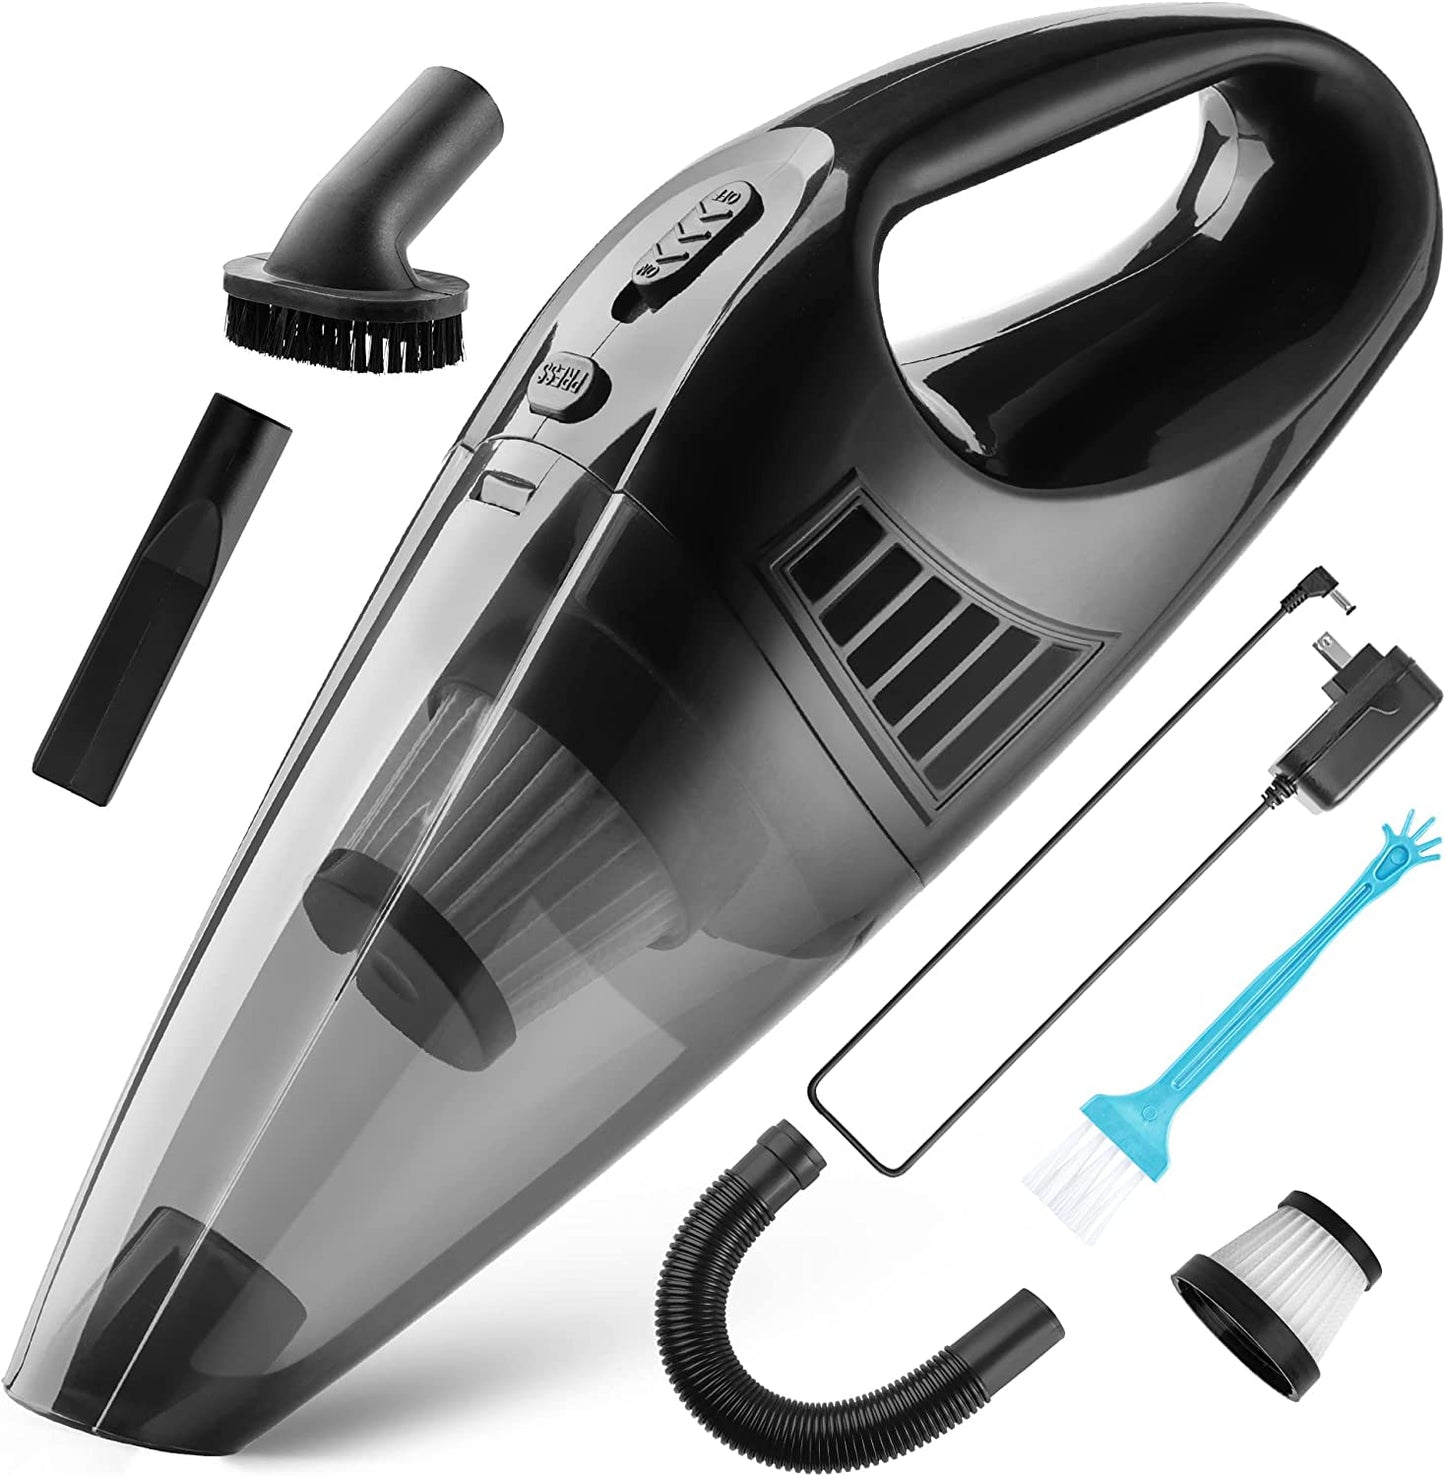 Cordless Handheld Vacuum Cleaner w/HEPA Filter, Rechargeable Lithium Ion & Charging Cable for Indoor Household Use (Black)